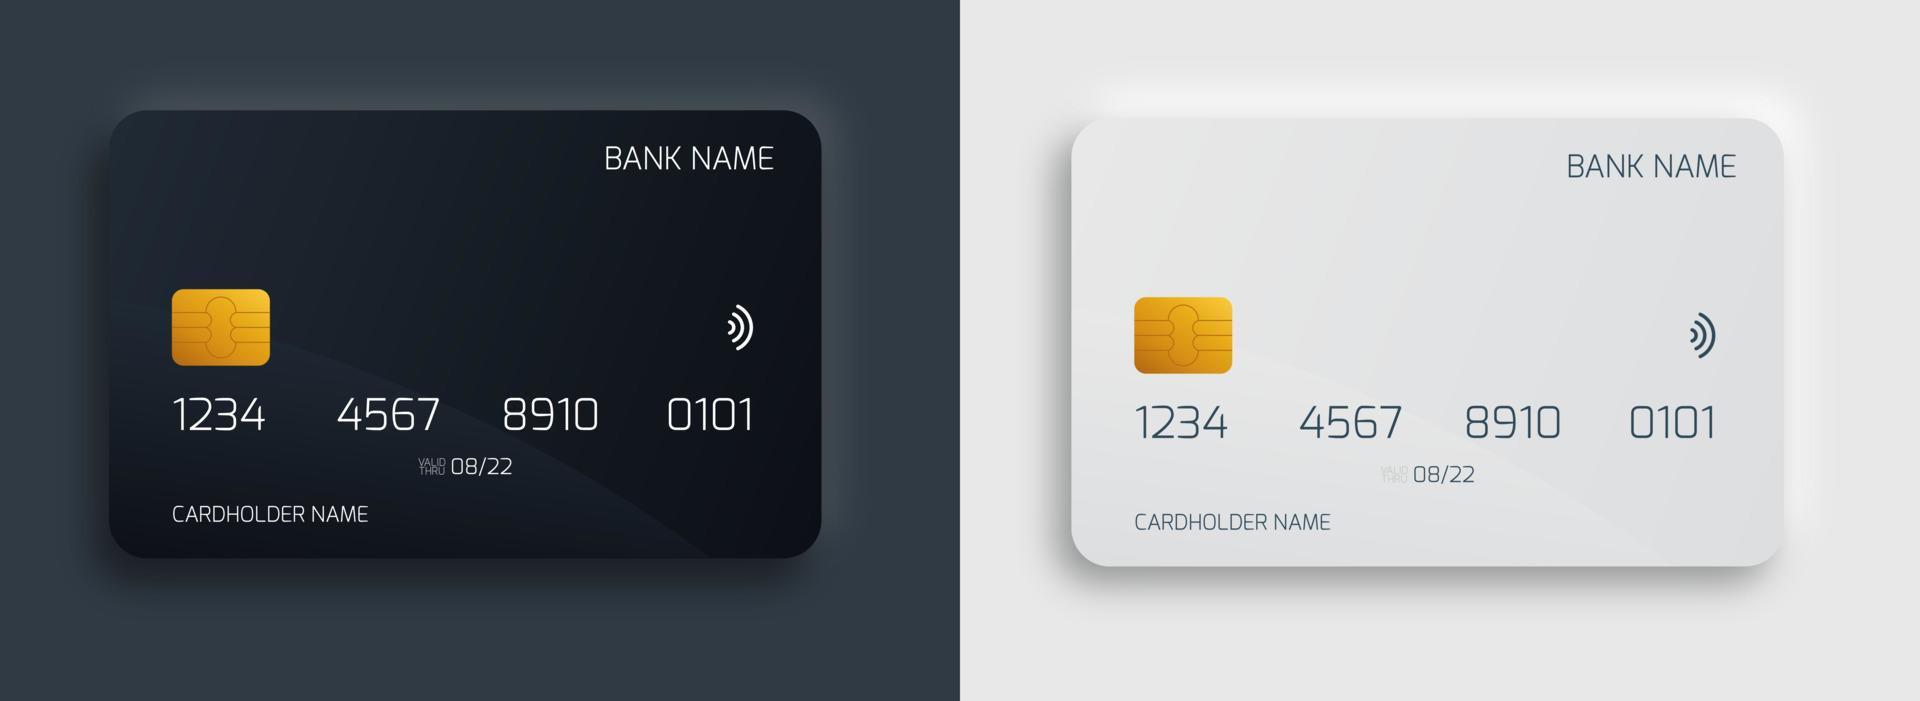 Plastic bank card design template set. Isolated credit or debit cards mockup with dark and light color style concept. vector